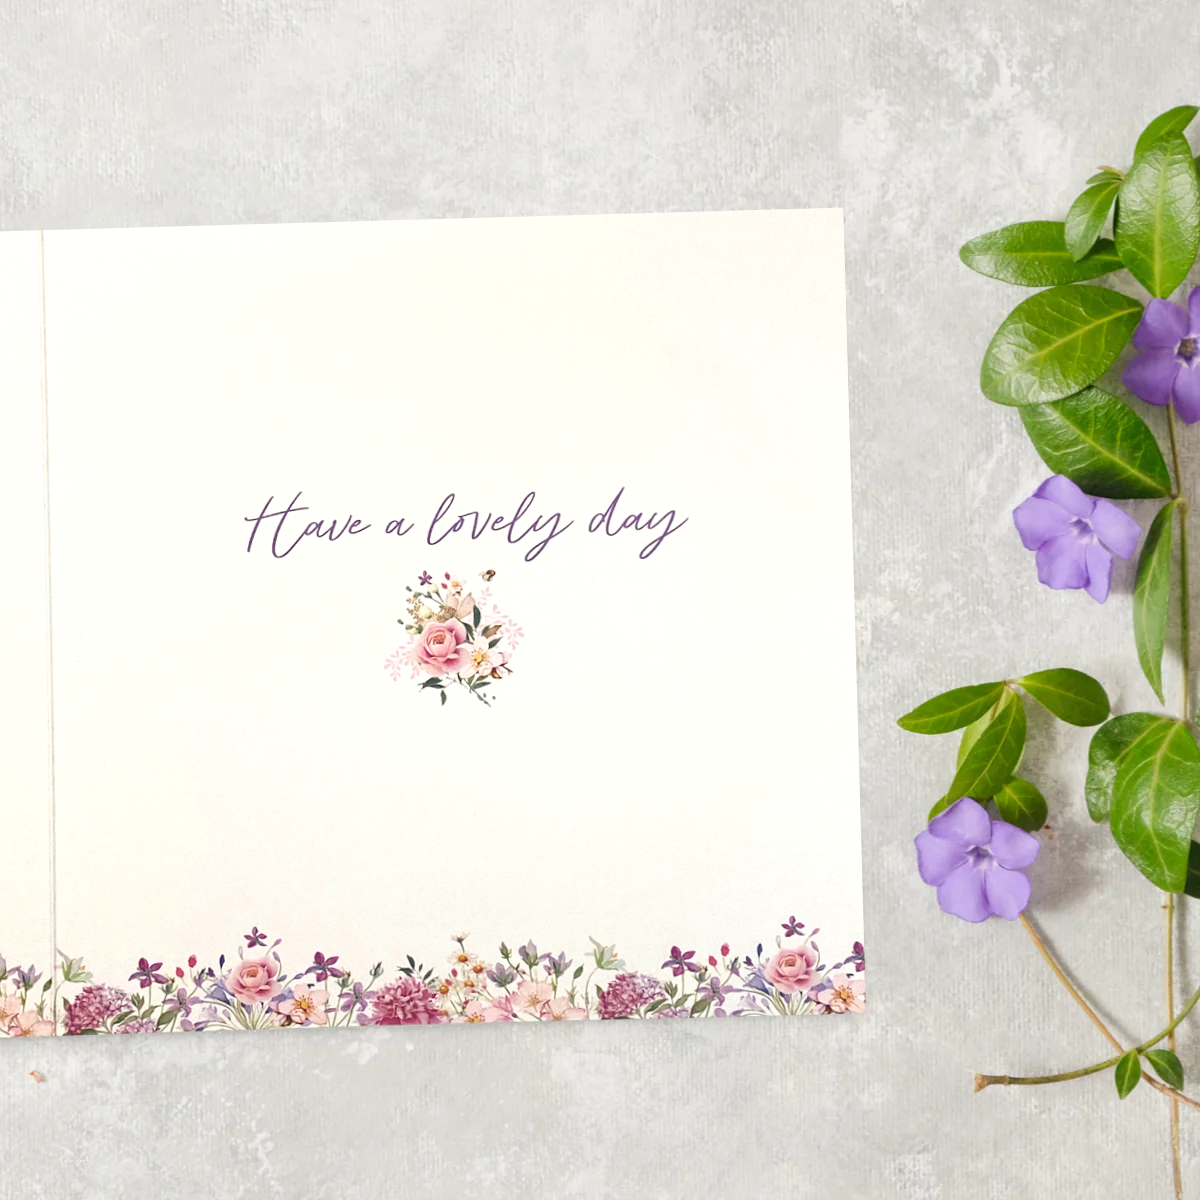 Inside image with floral border and text